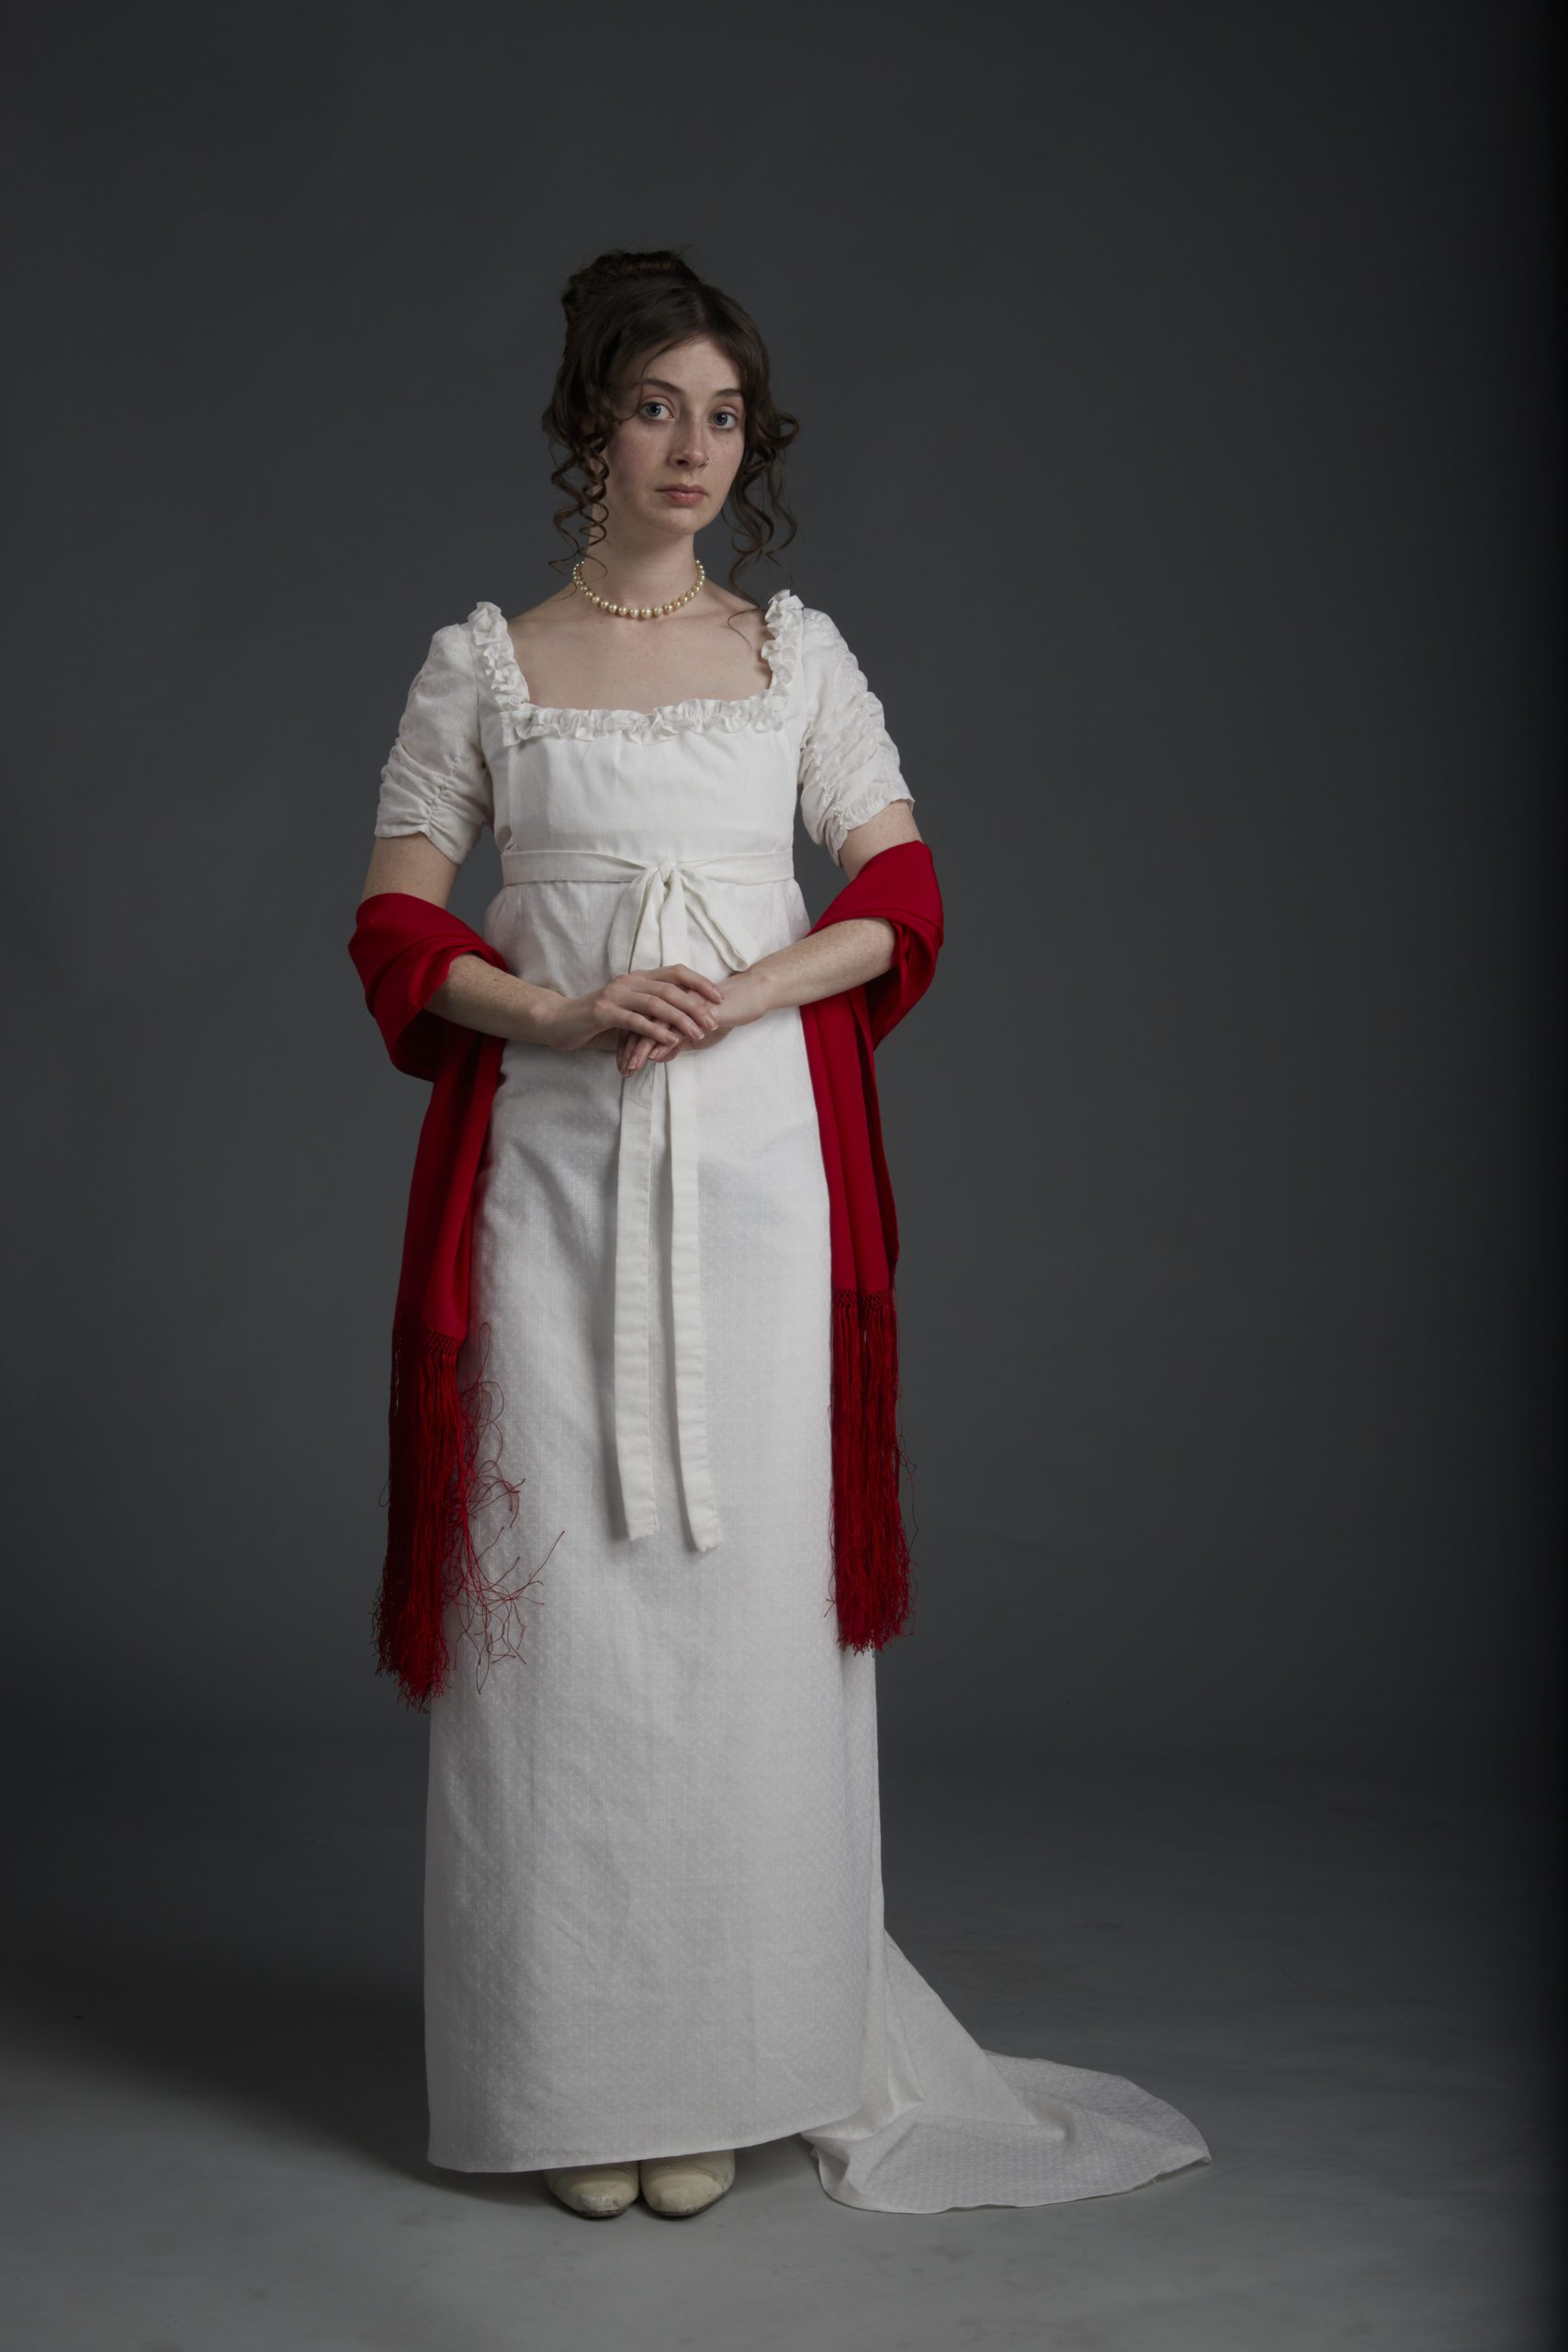 A full picture of the white dress Rowan made worn by a woman